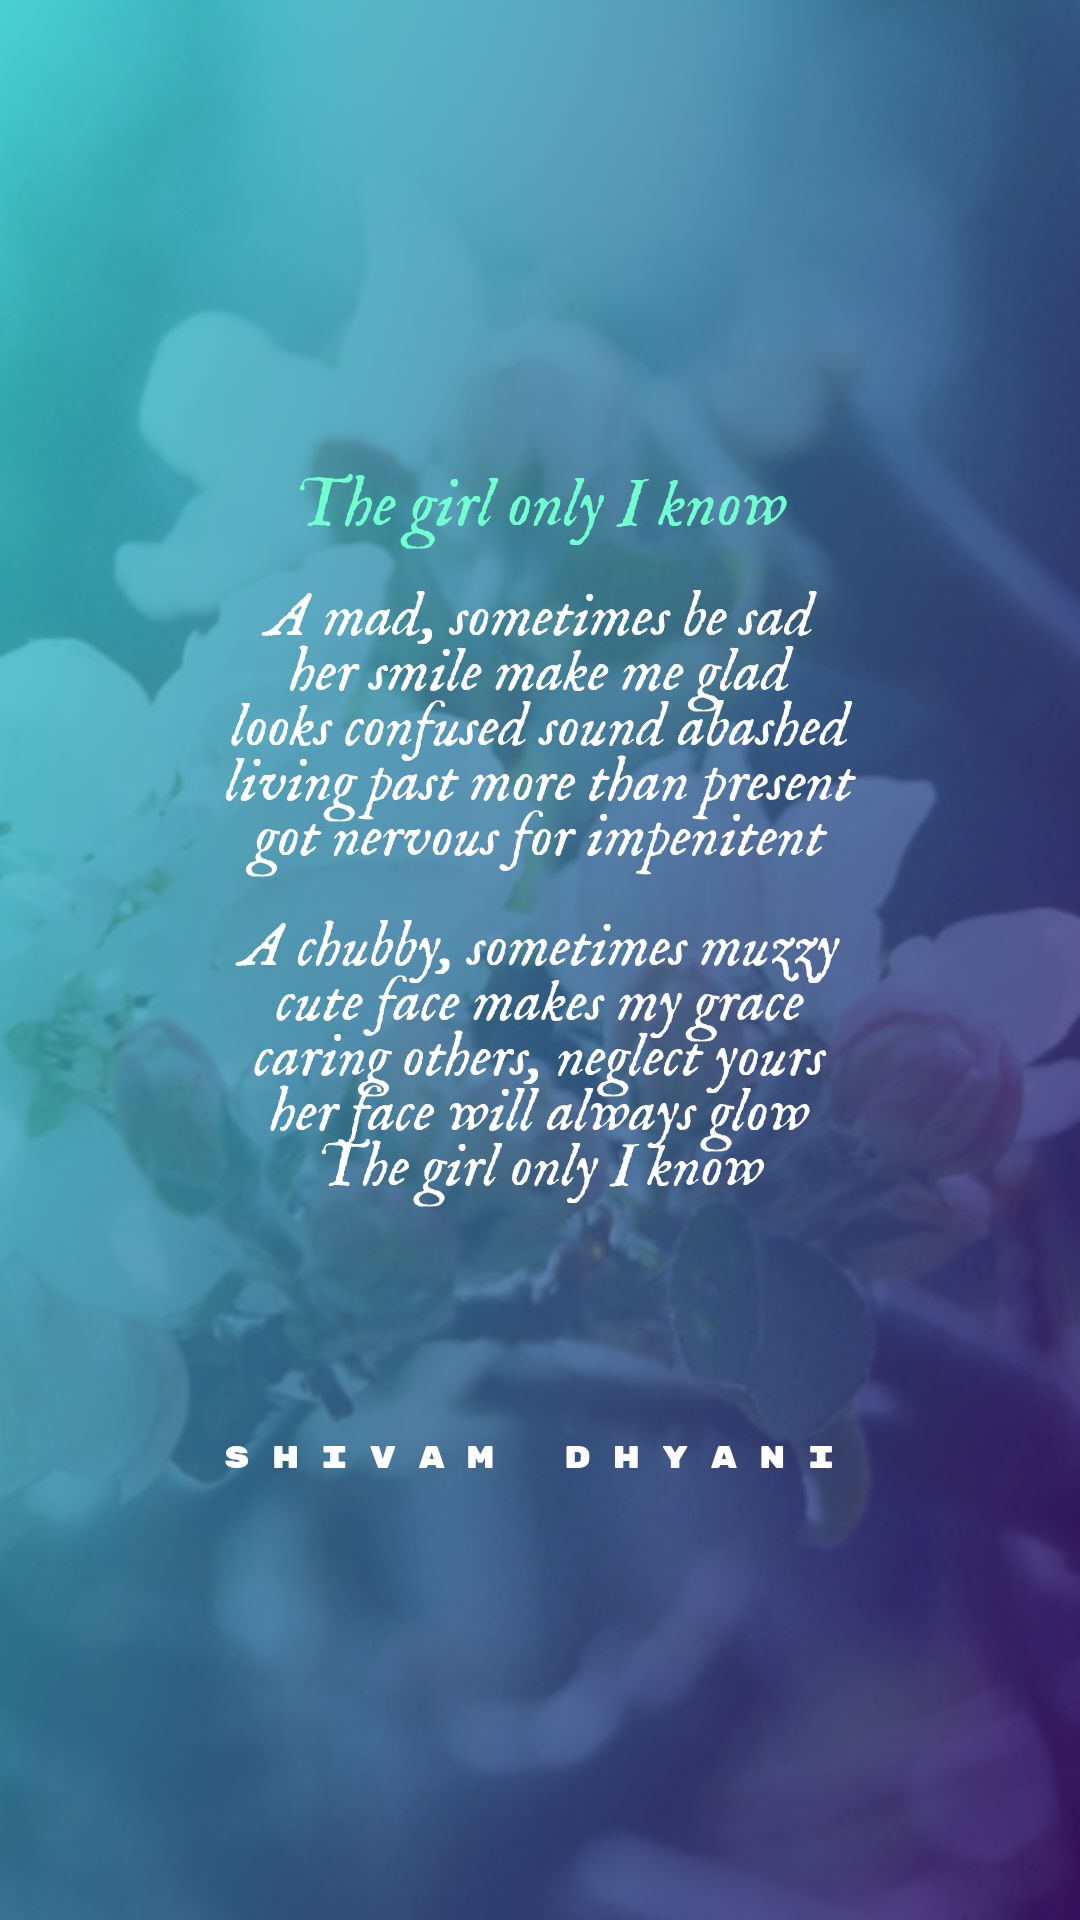 "The Girl Only I Know" by Shivam Dhyani